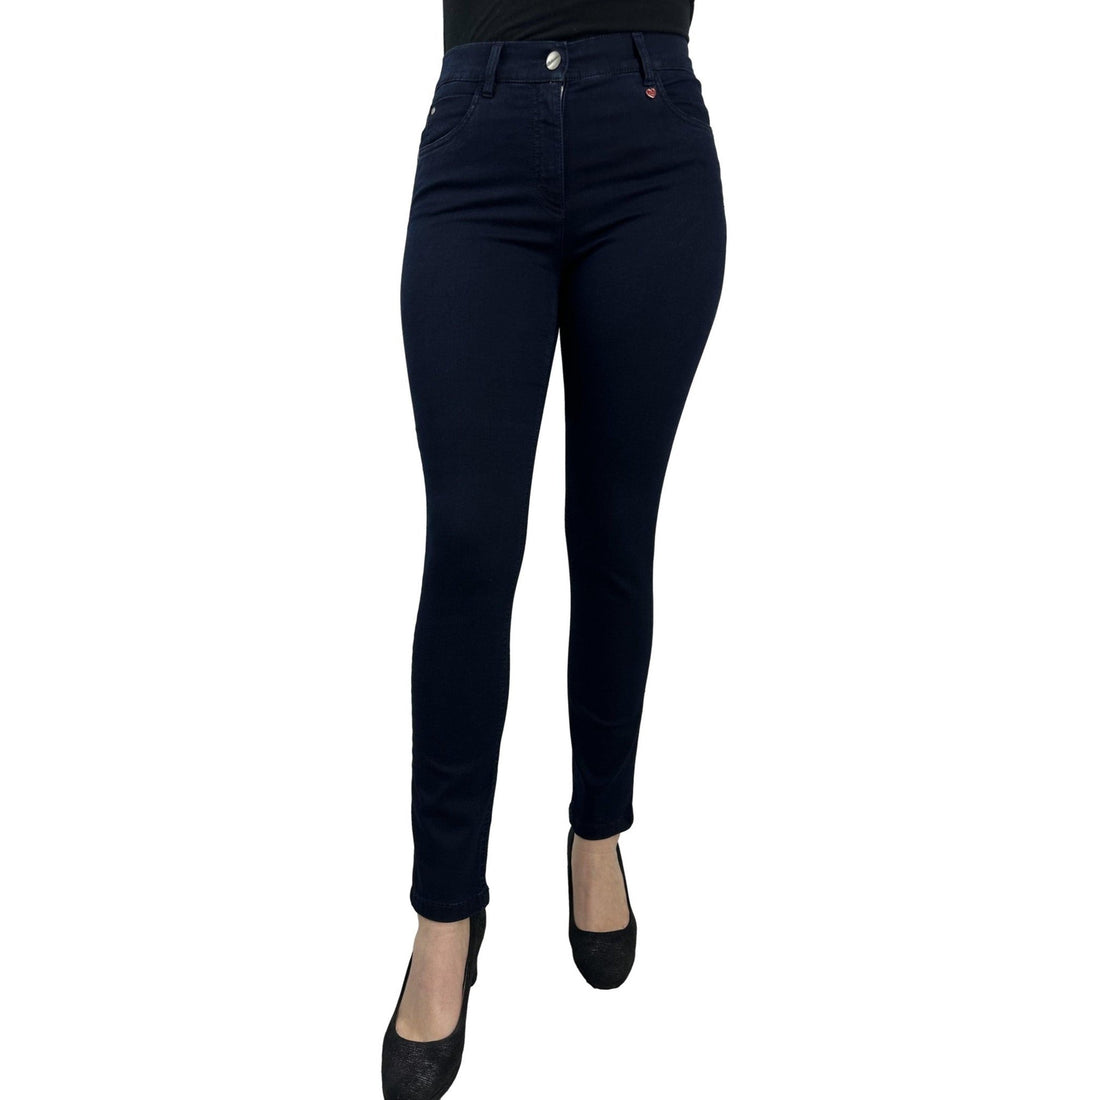 Relaxed by Toni Jeans My Style 12-02. Mode von Relaxed by Toni